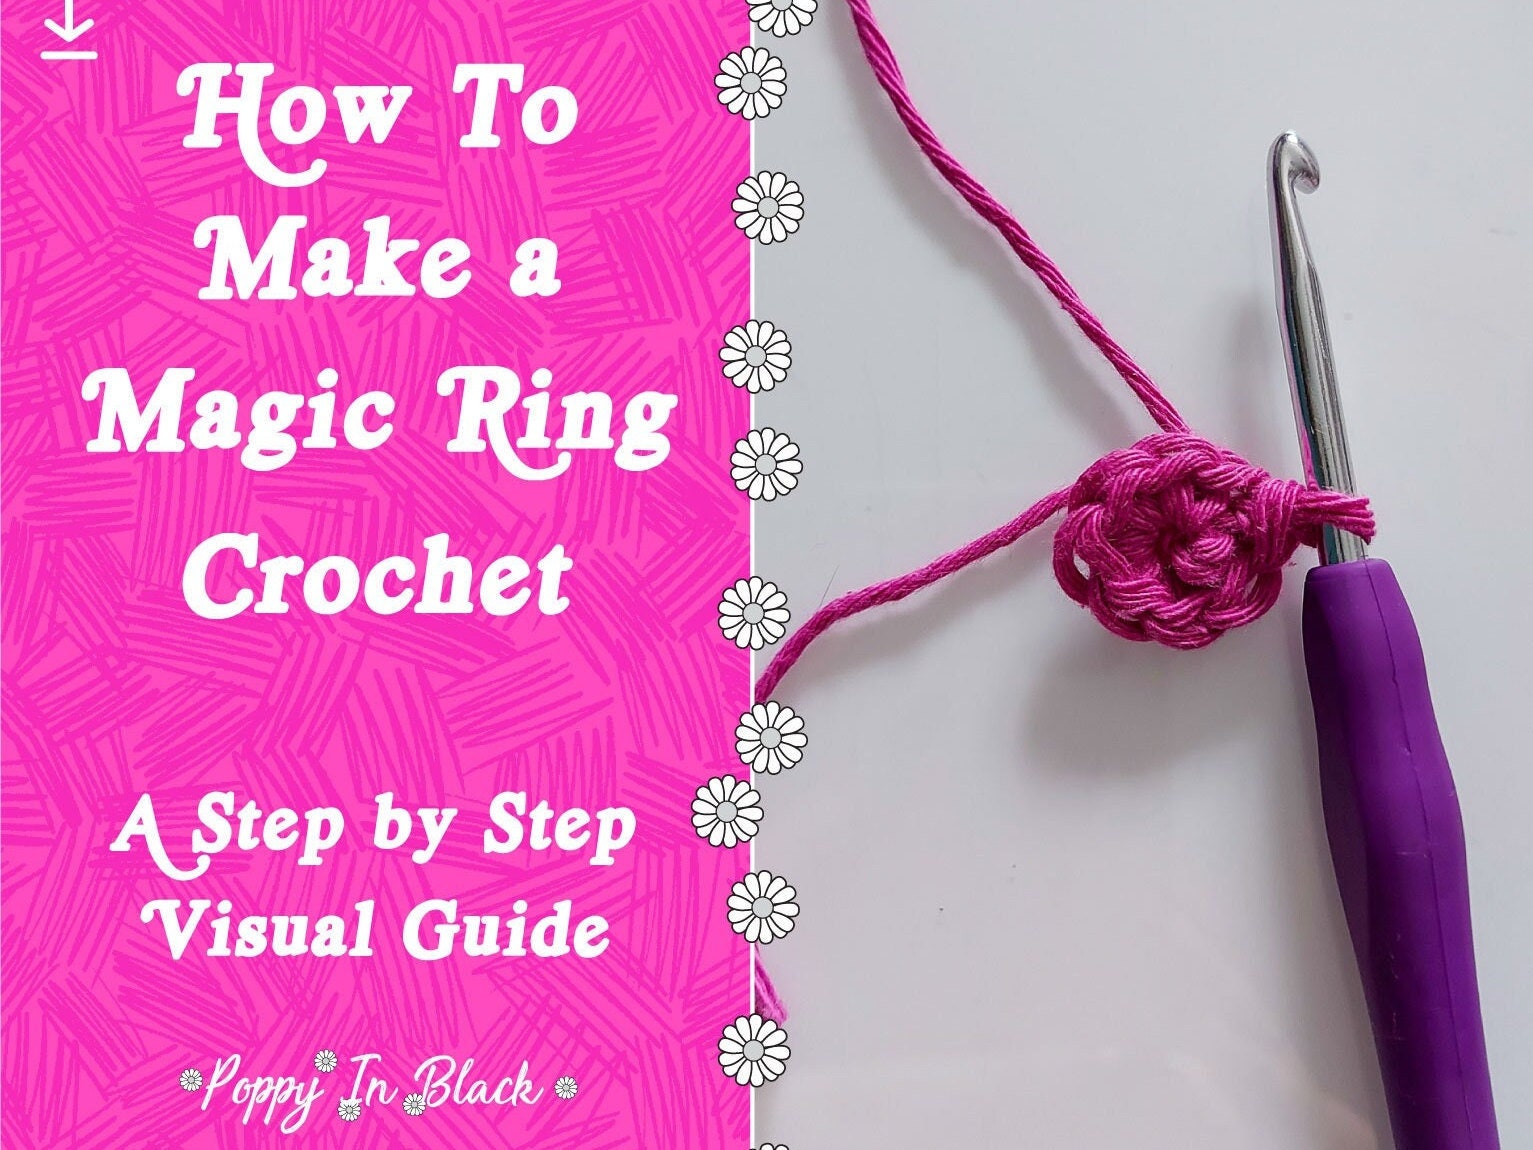 4 Ways to Crochet a Magic Ring - wikiHow